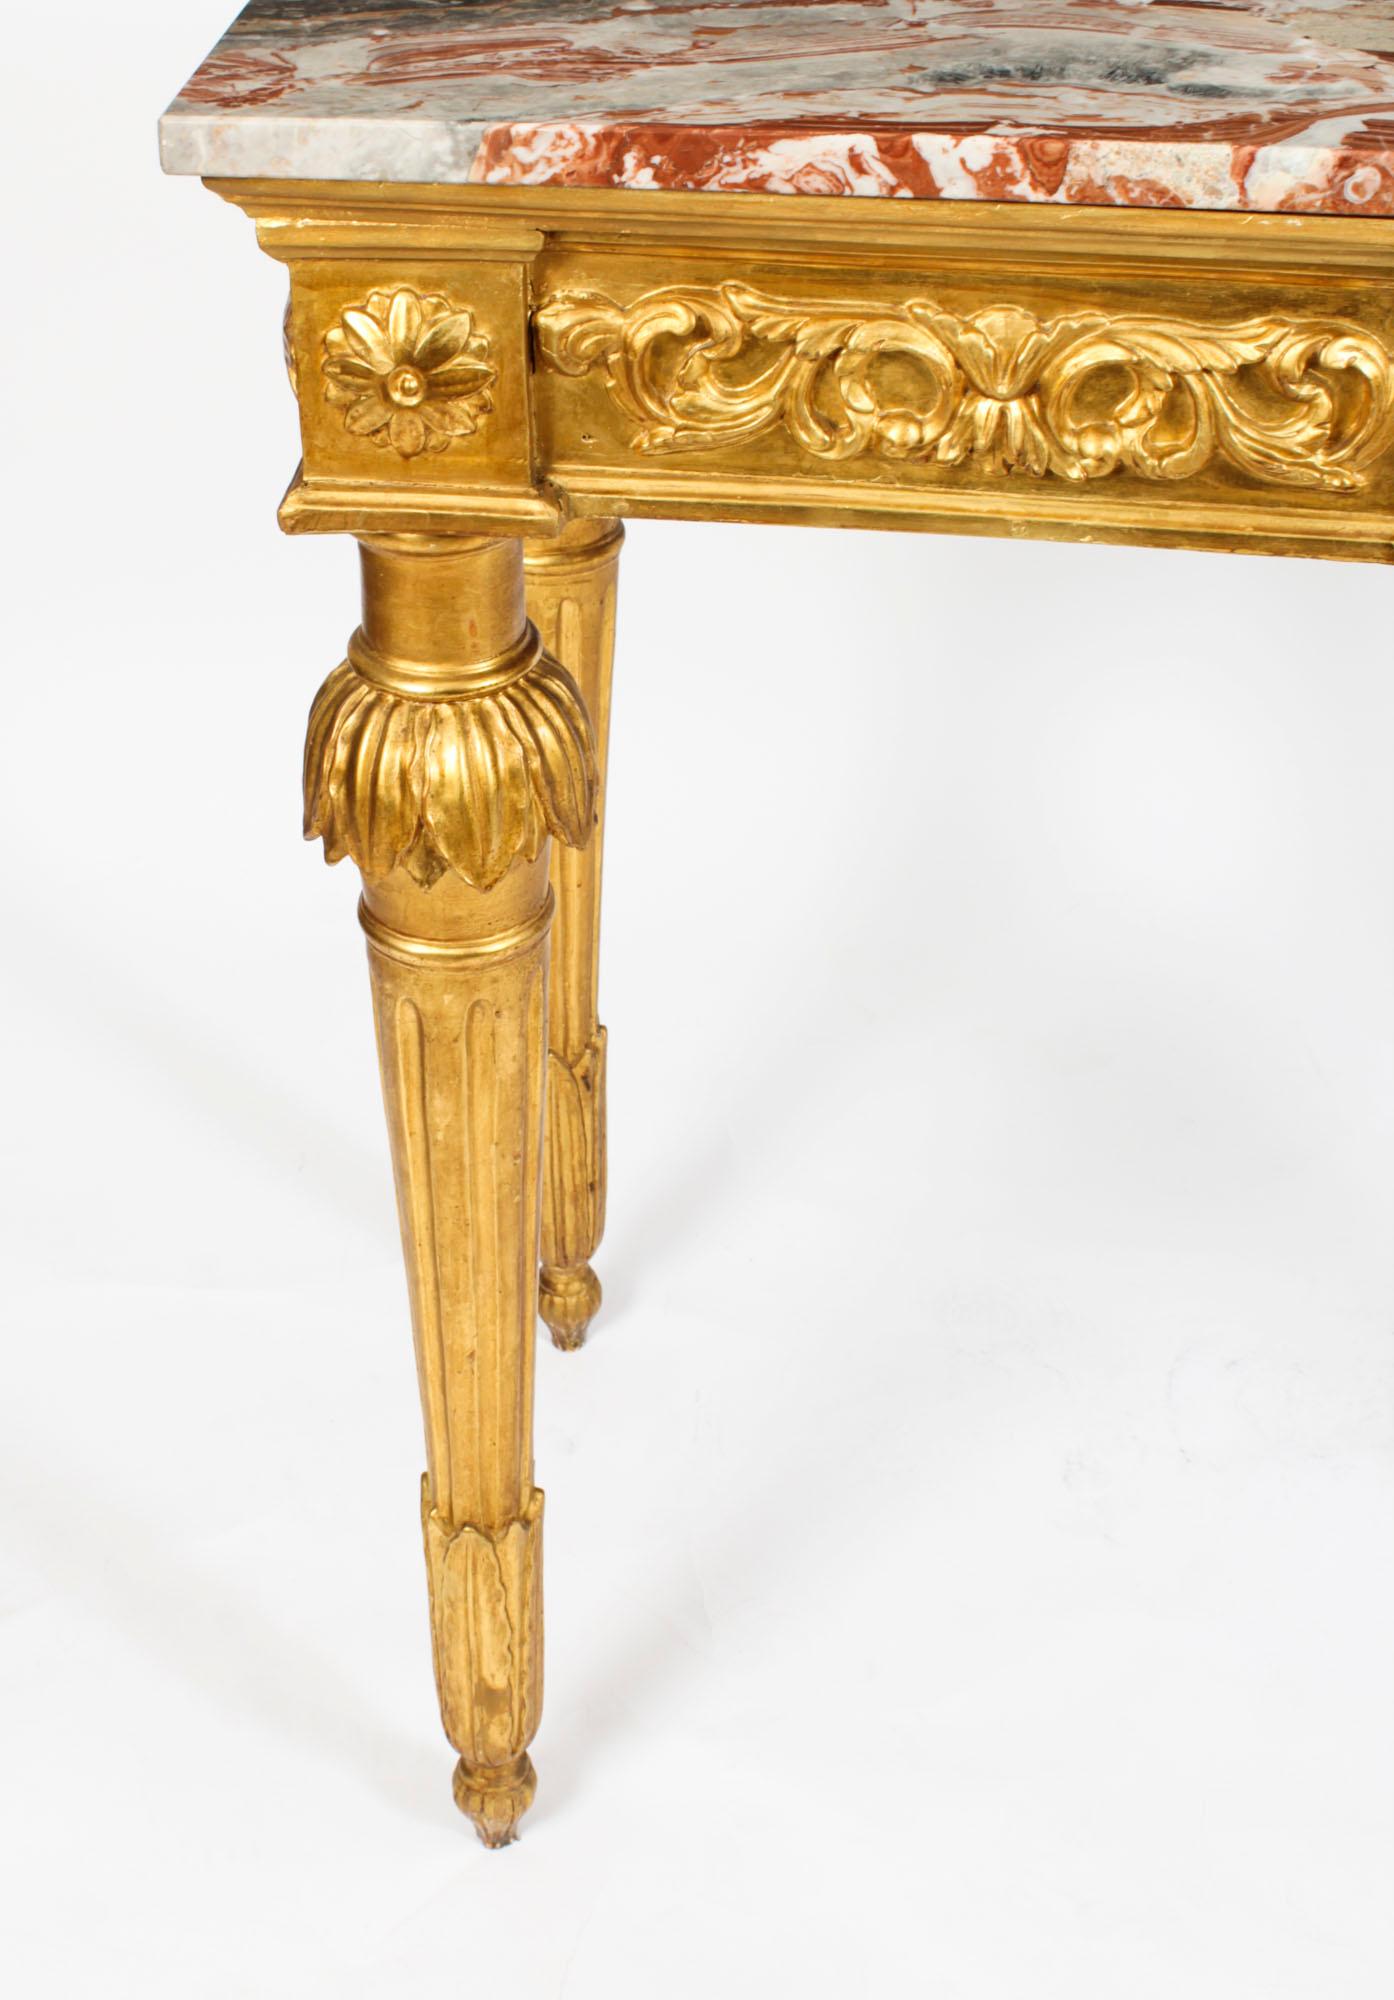 Antique Louis XV Revival Carved Giltwood Console Pier Table, 19th Century For Sale 6